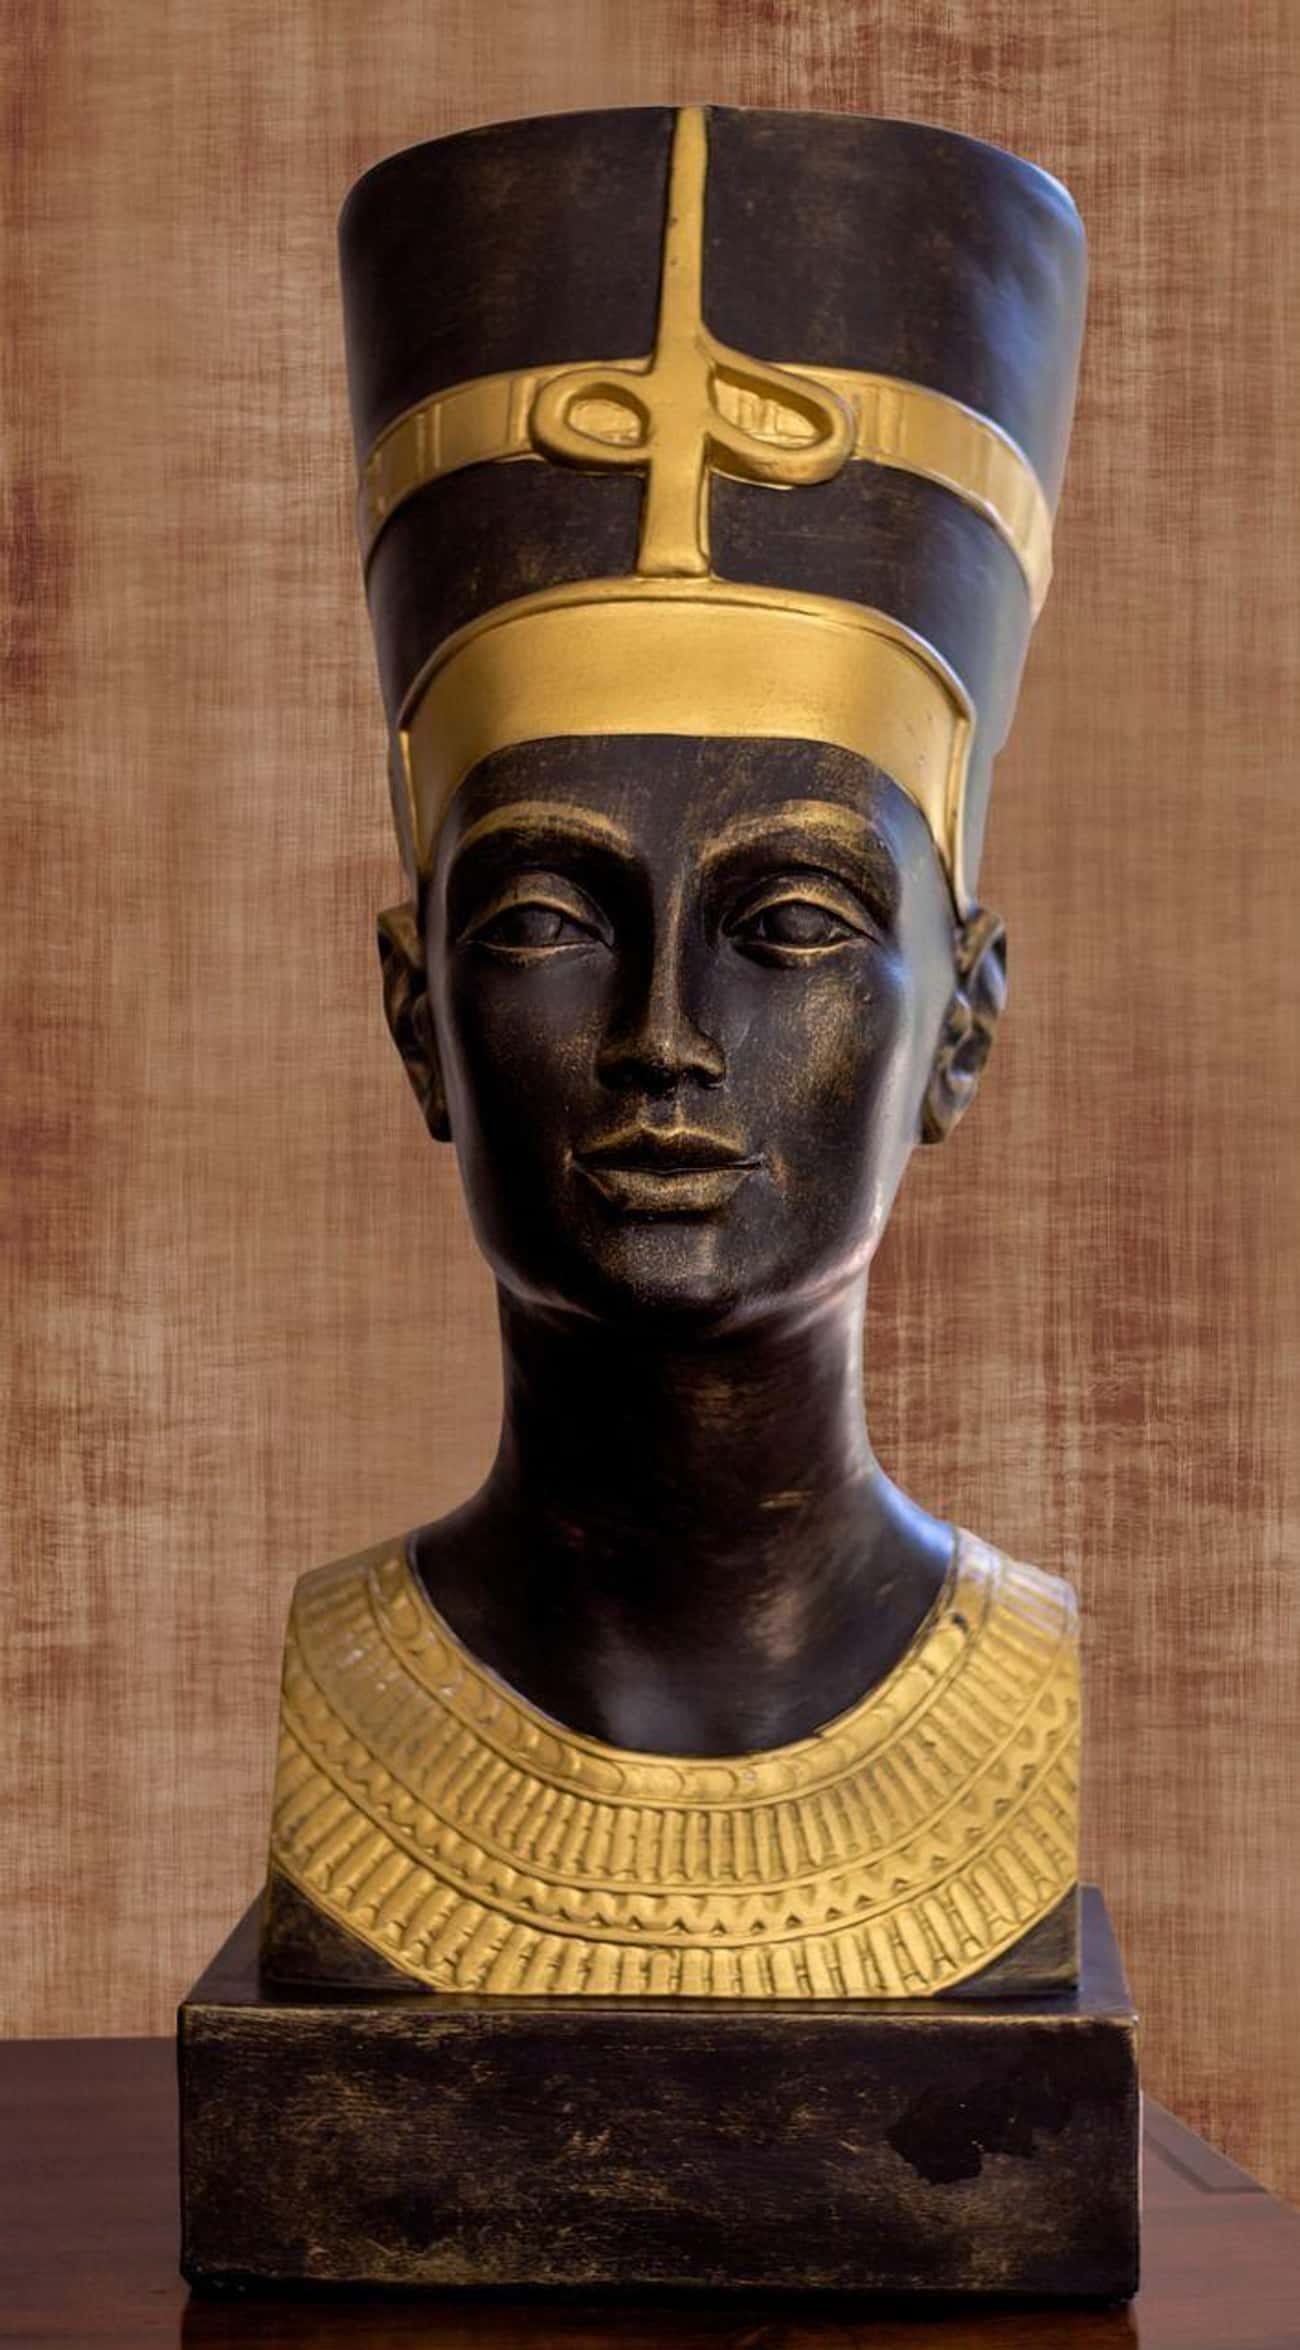 Nefertiti Held Many Titles During Her Reign